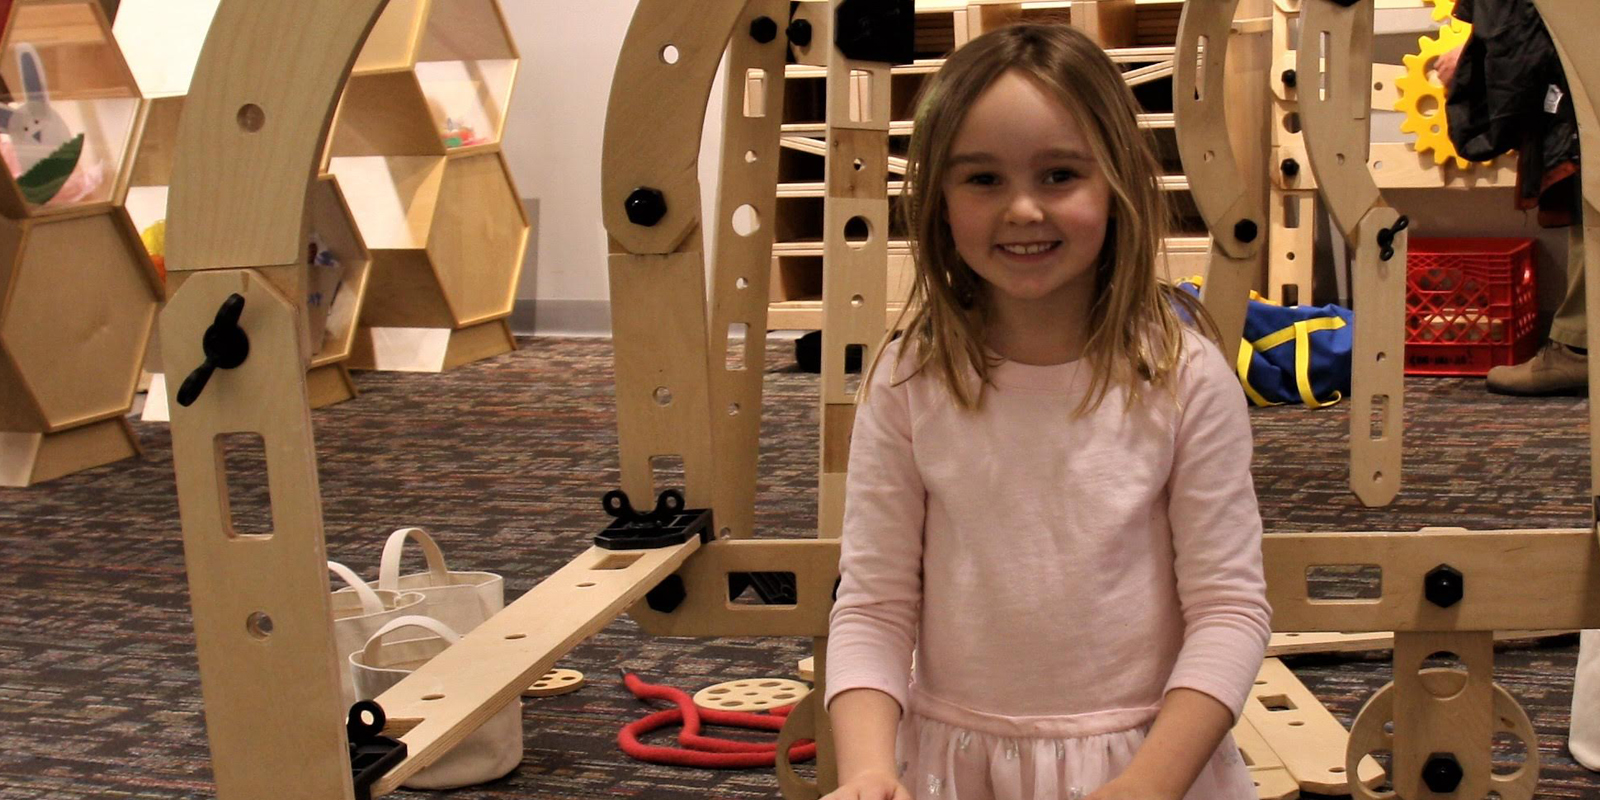 Young girl with pink dress is smiling in front of large wooden erector set